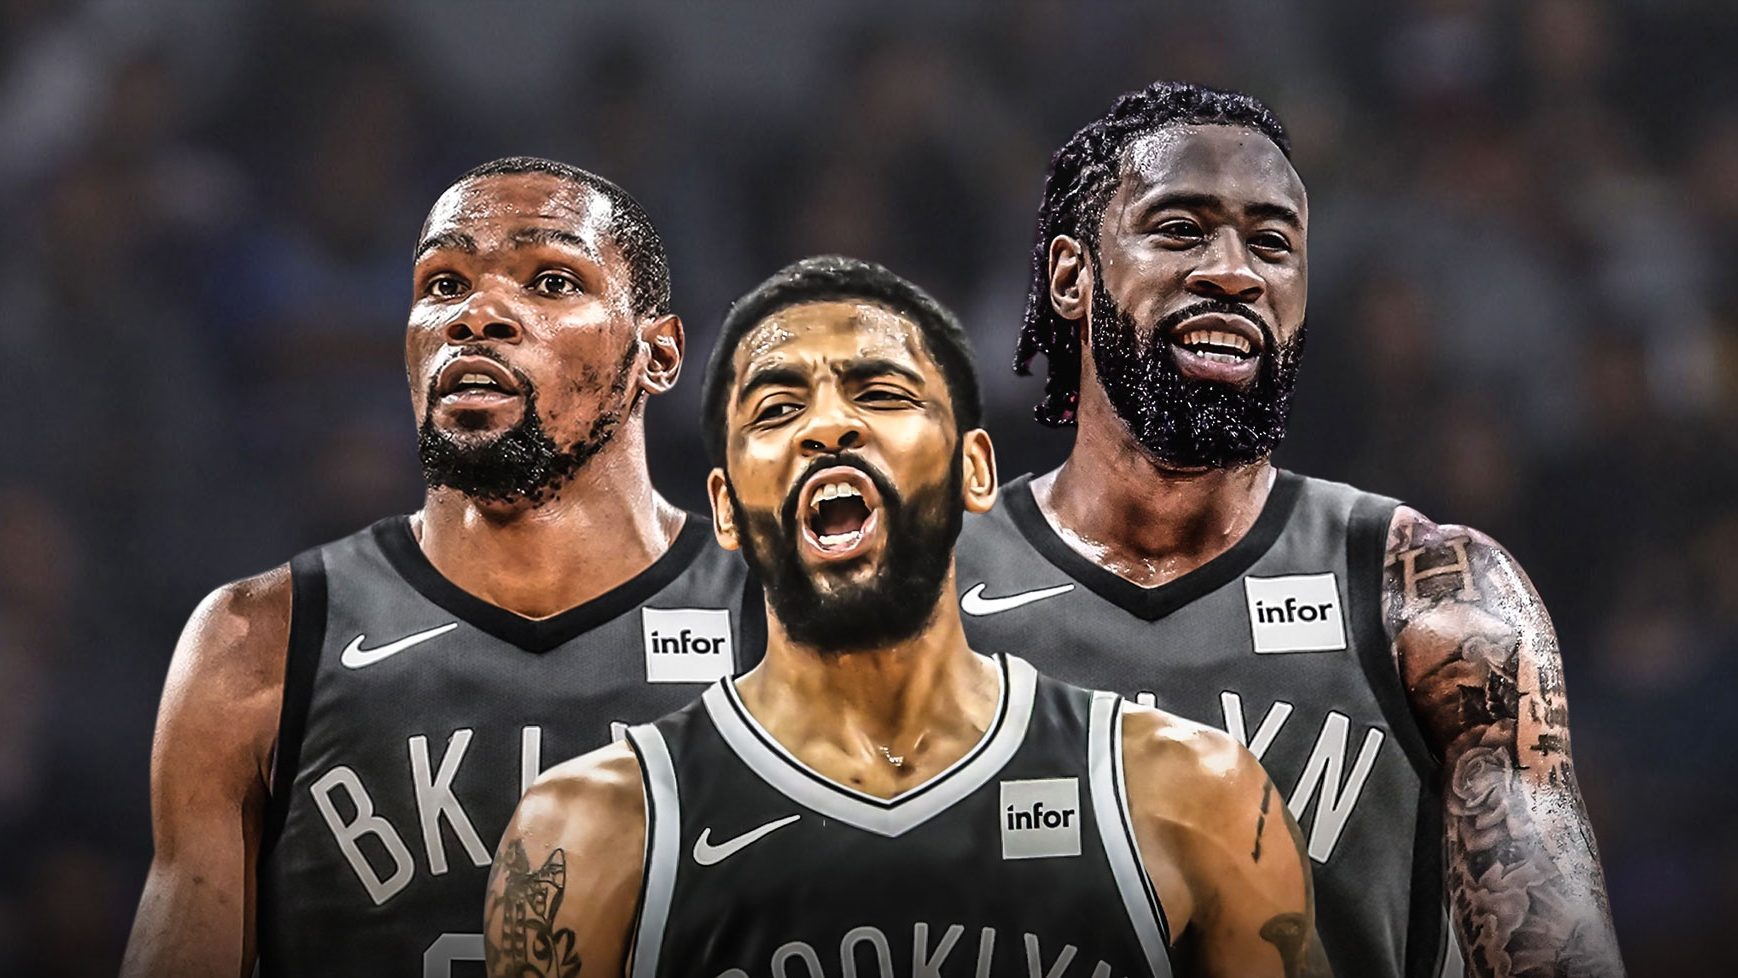 Nba 2020 Draft For The Brooklyn Nets Kyrie Irving Kevin Durant Deandre Jordan And More